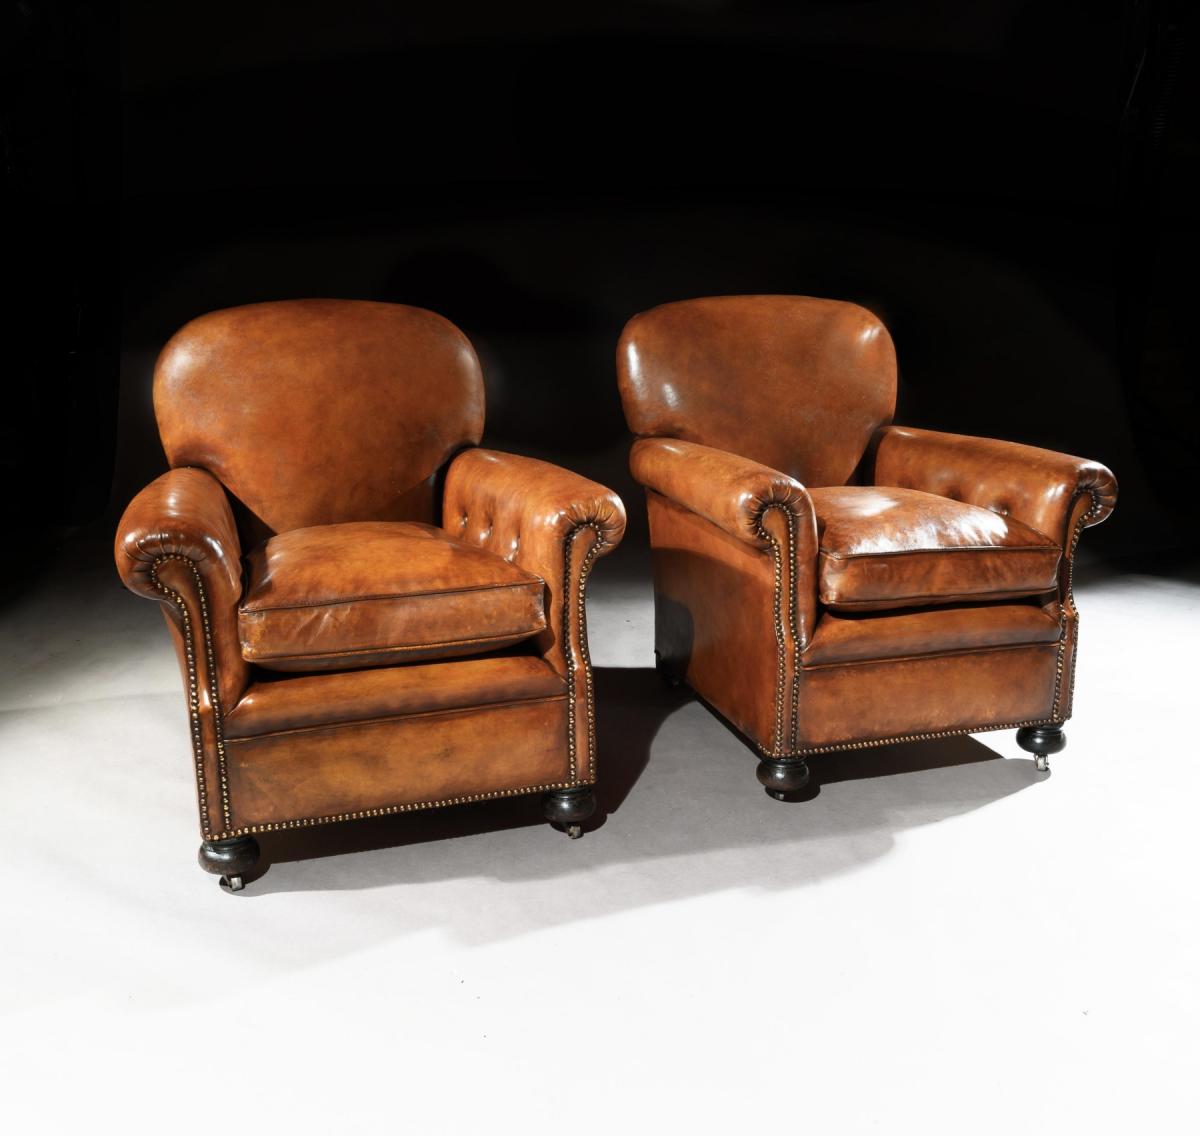 Pair of Antique Leather Club Armchairs